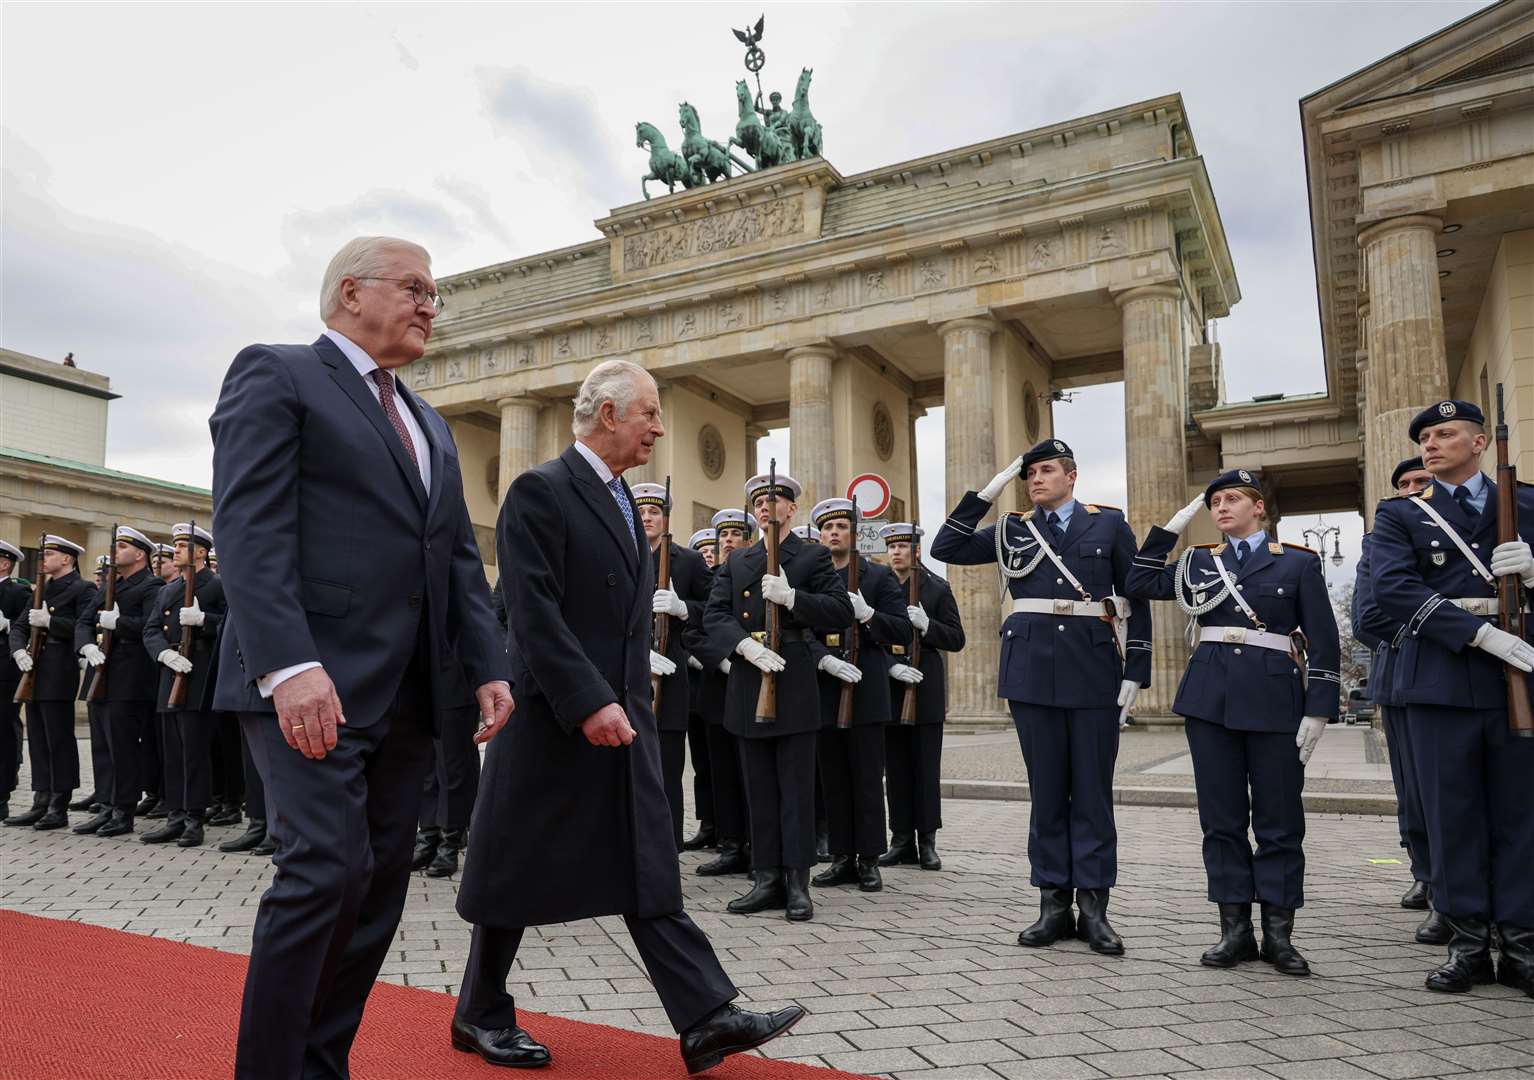 German President Frank-Walter Steinmeier (left) and the King inspect a guard of honour during the ceremonial welcome at the Brandenburg Gate, Berlin (Adrian Dennis/PA)